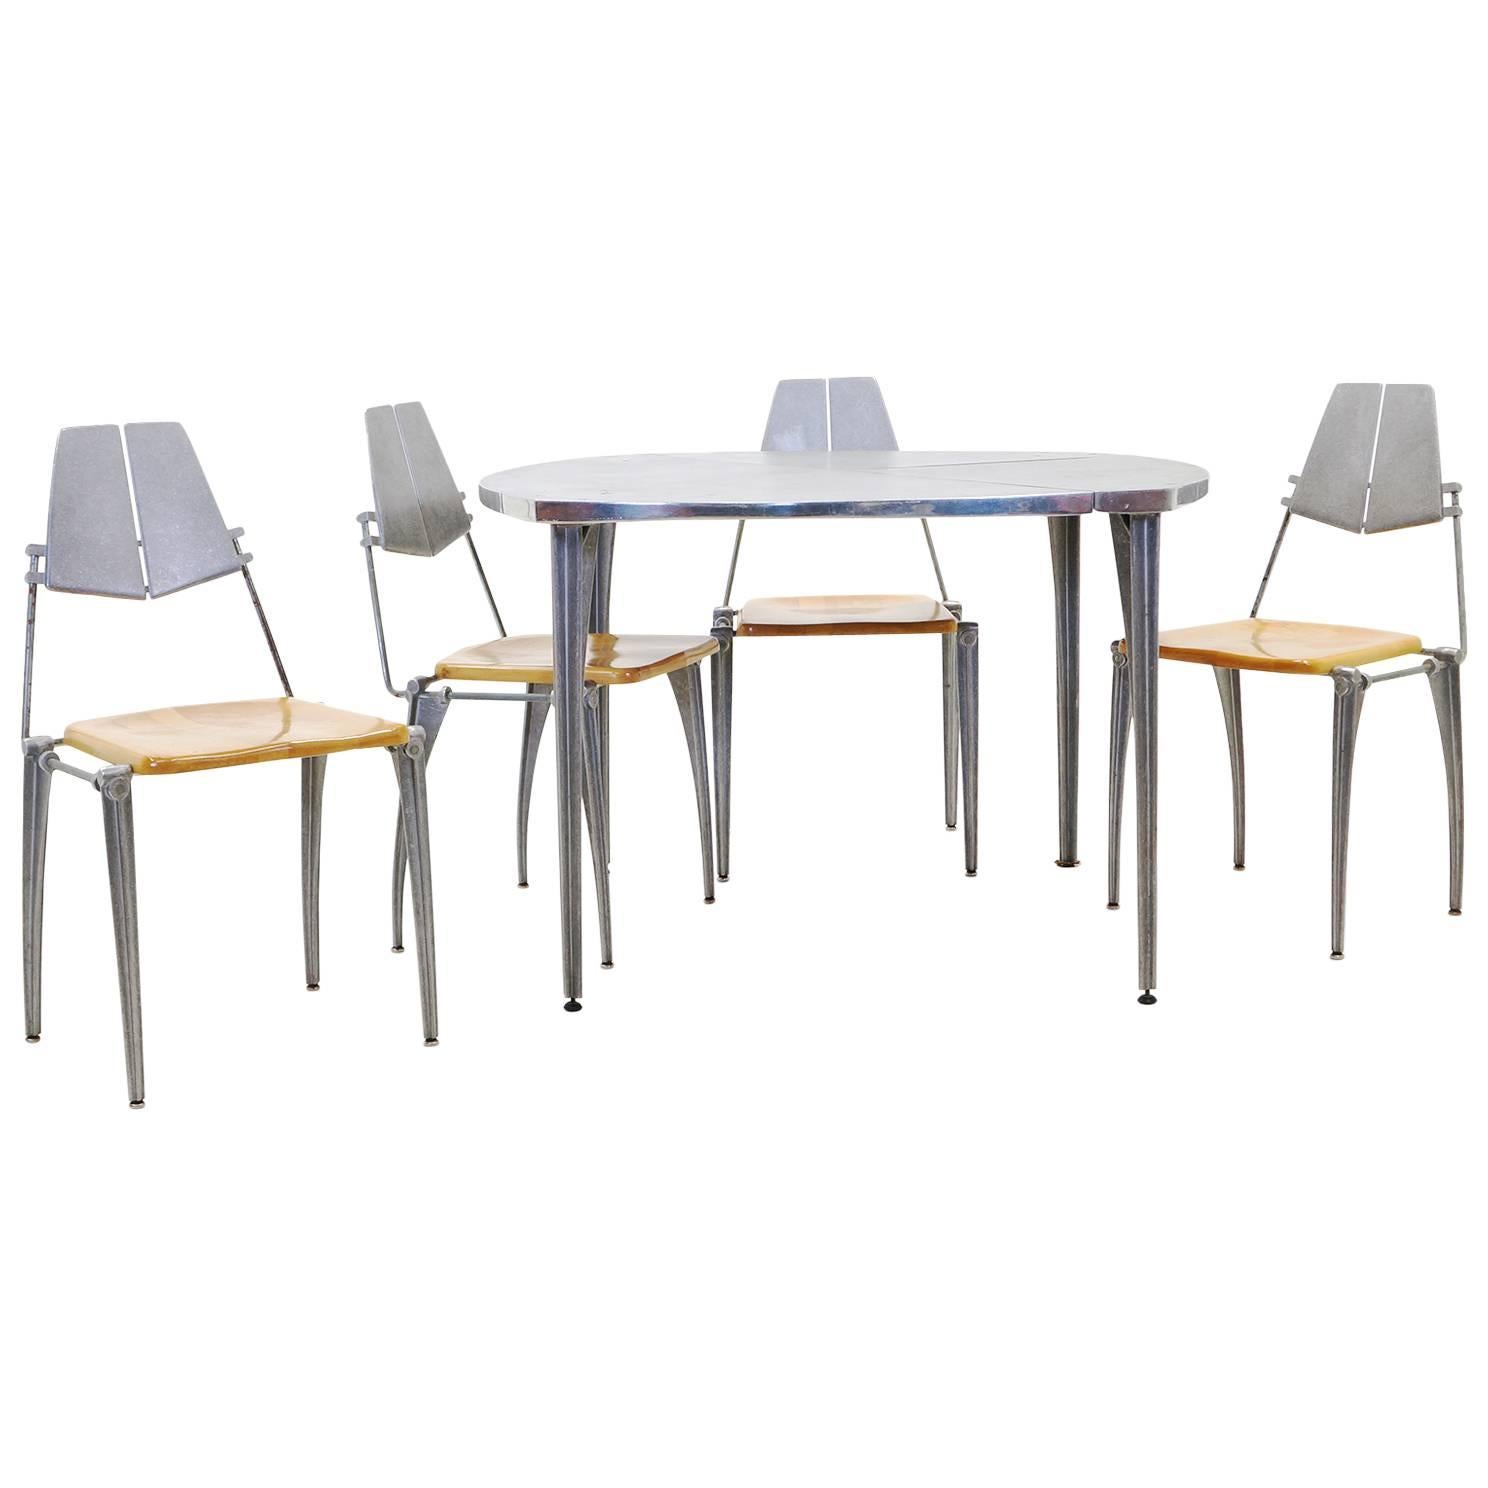 Robert Josten Table and Chairs, Very Desirable Version with Cast Aluminum Table